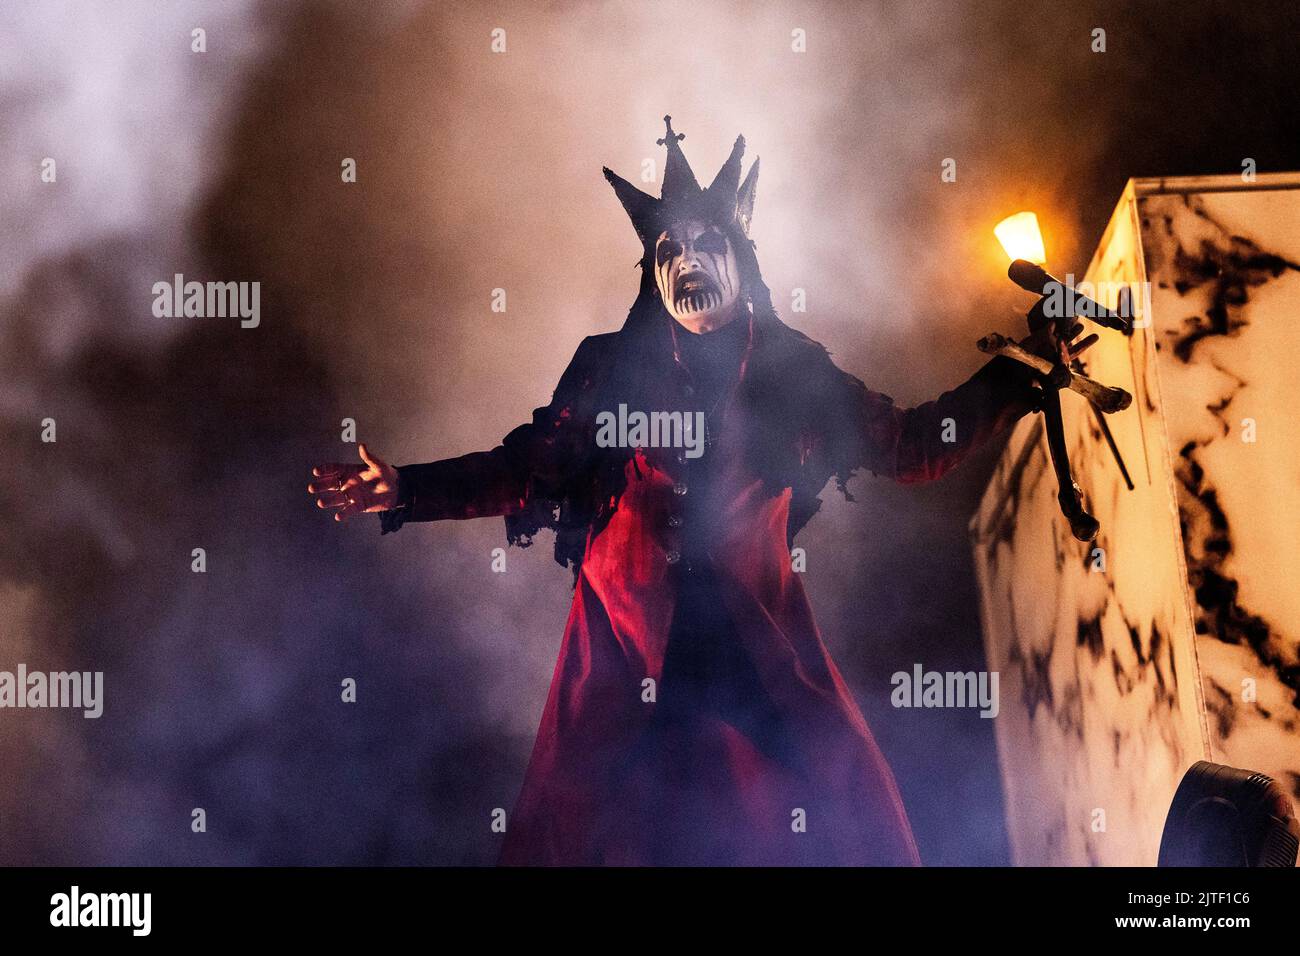 Solvesborg, Sweden. 10th, June 2022.The Danish heavy metal band Mercyful Fate performs a live concert during the Swedish music festival Sweden Rock Festival 2022 in Solvesborg. Here vocalist King Diamond is seen live on stage. (Photo credit: Gonzales Photo - Terje Dokken). Stock Photo